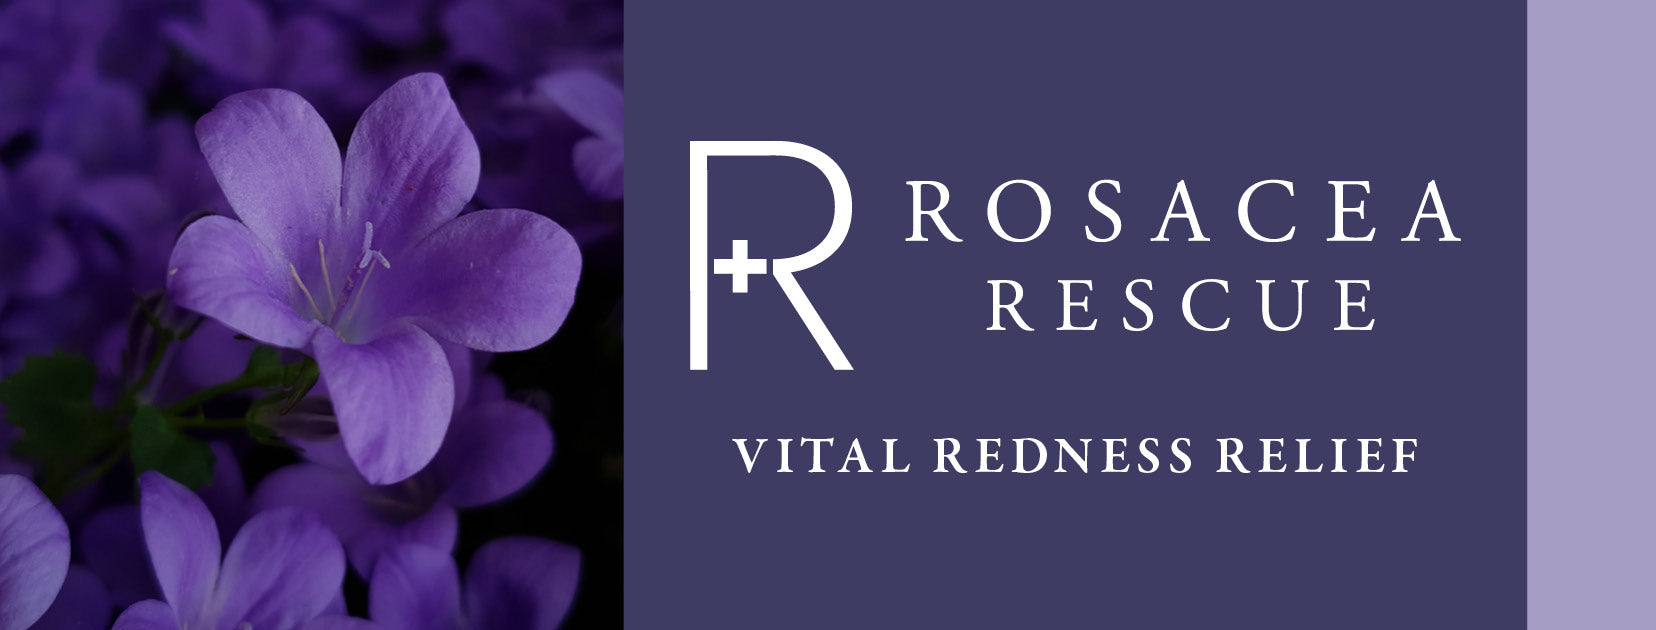 Rosacea Rescue - Cleansers